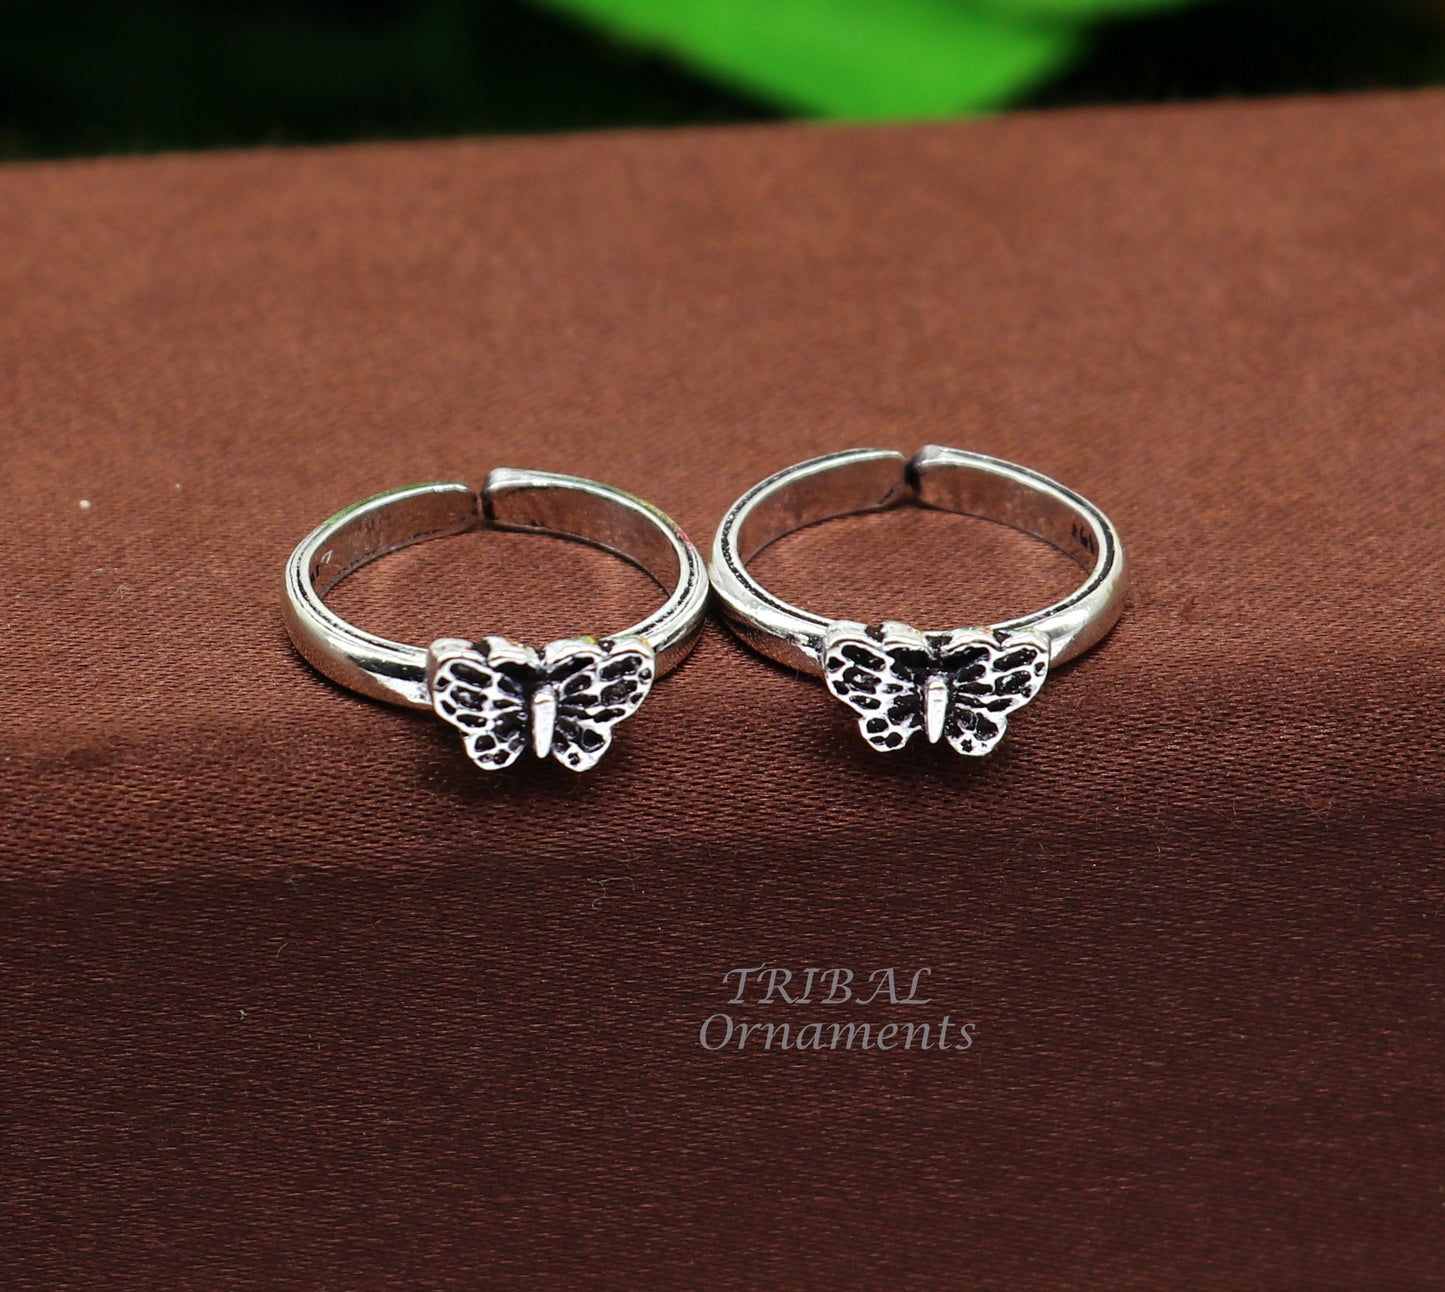 Floral design vintage style handmade 925 sterling silver adjustable toe ring band for brides or girl's best personalized jewelry ytr77 - TRIBAL ORNAMENTS